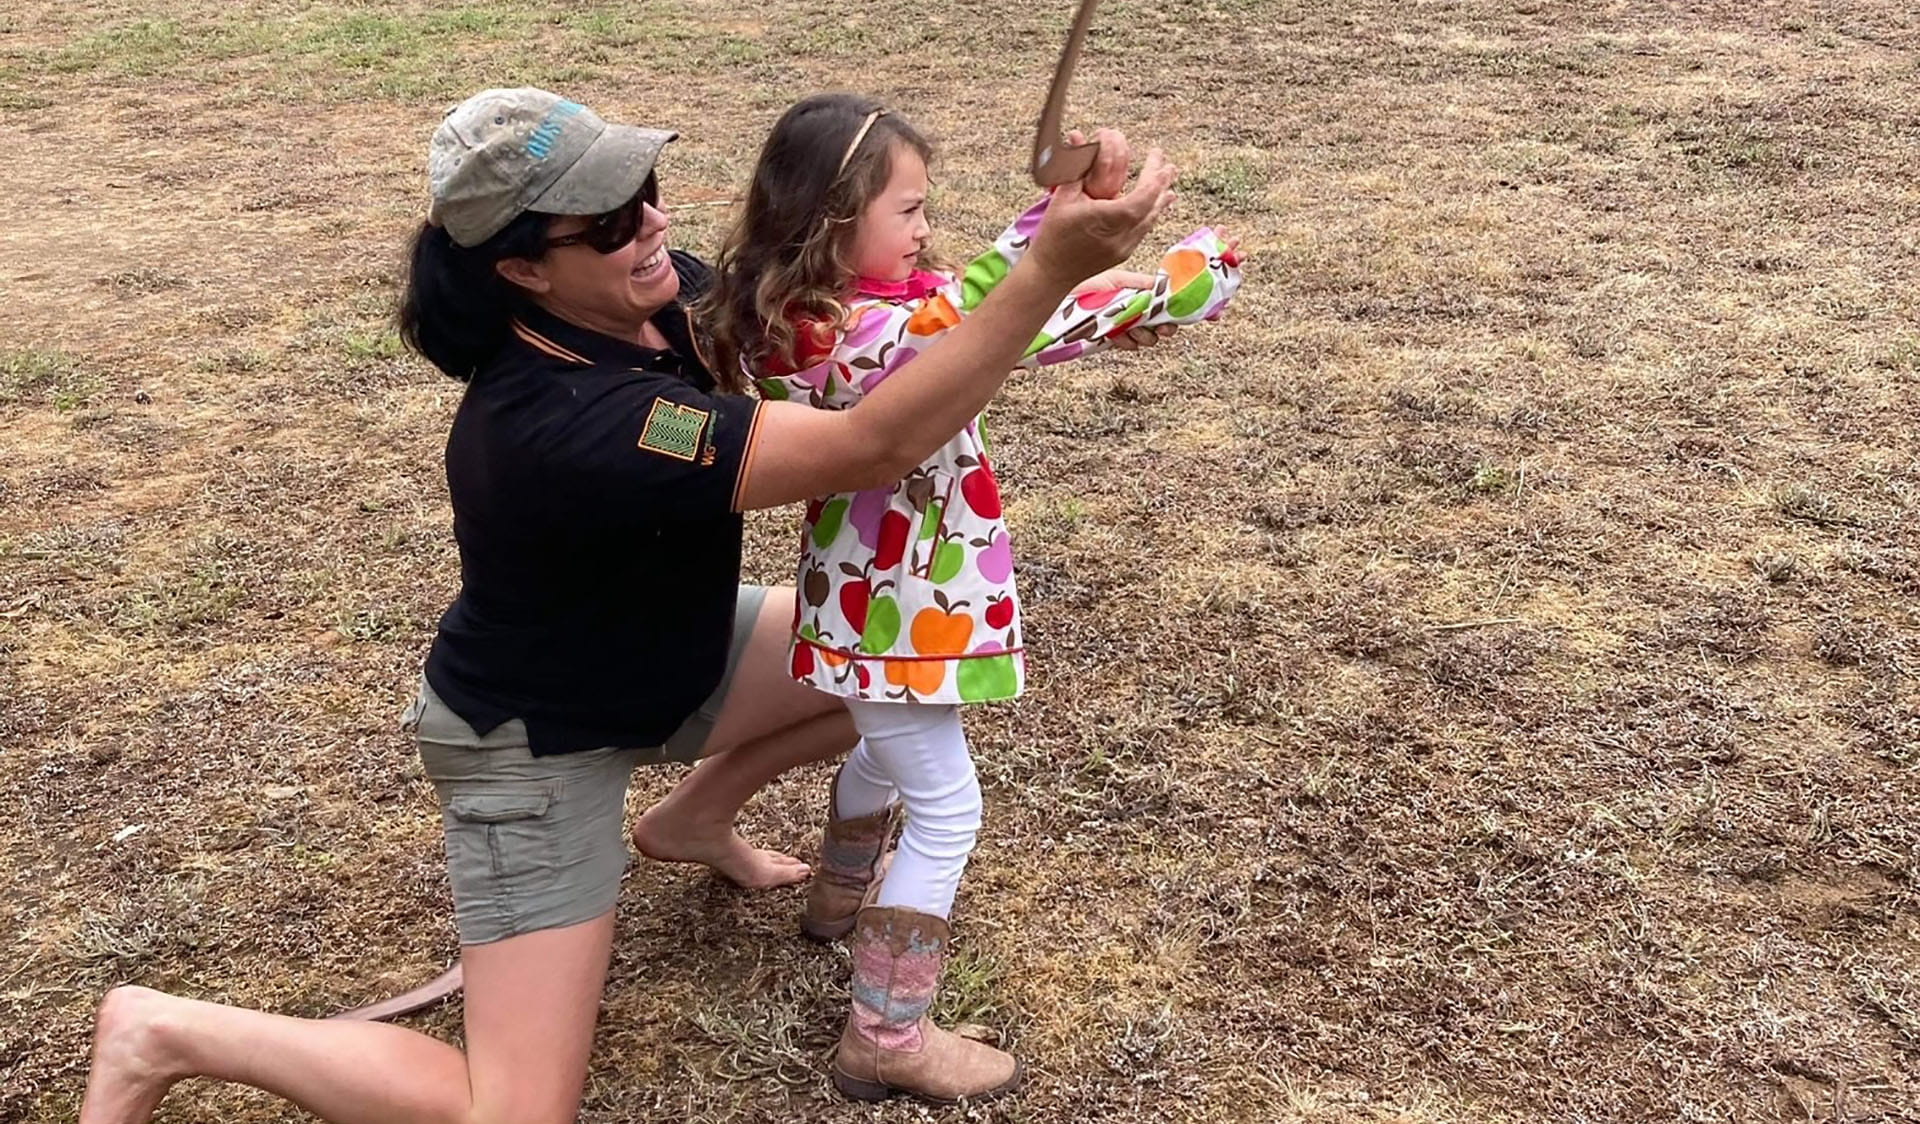 A woman teaching child how to throw a boomerang.